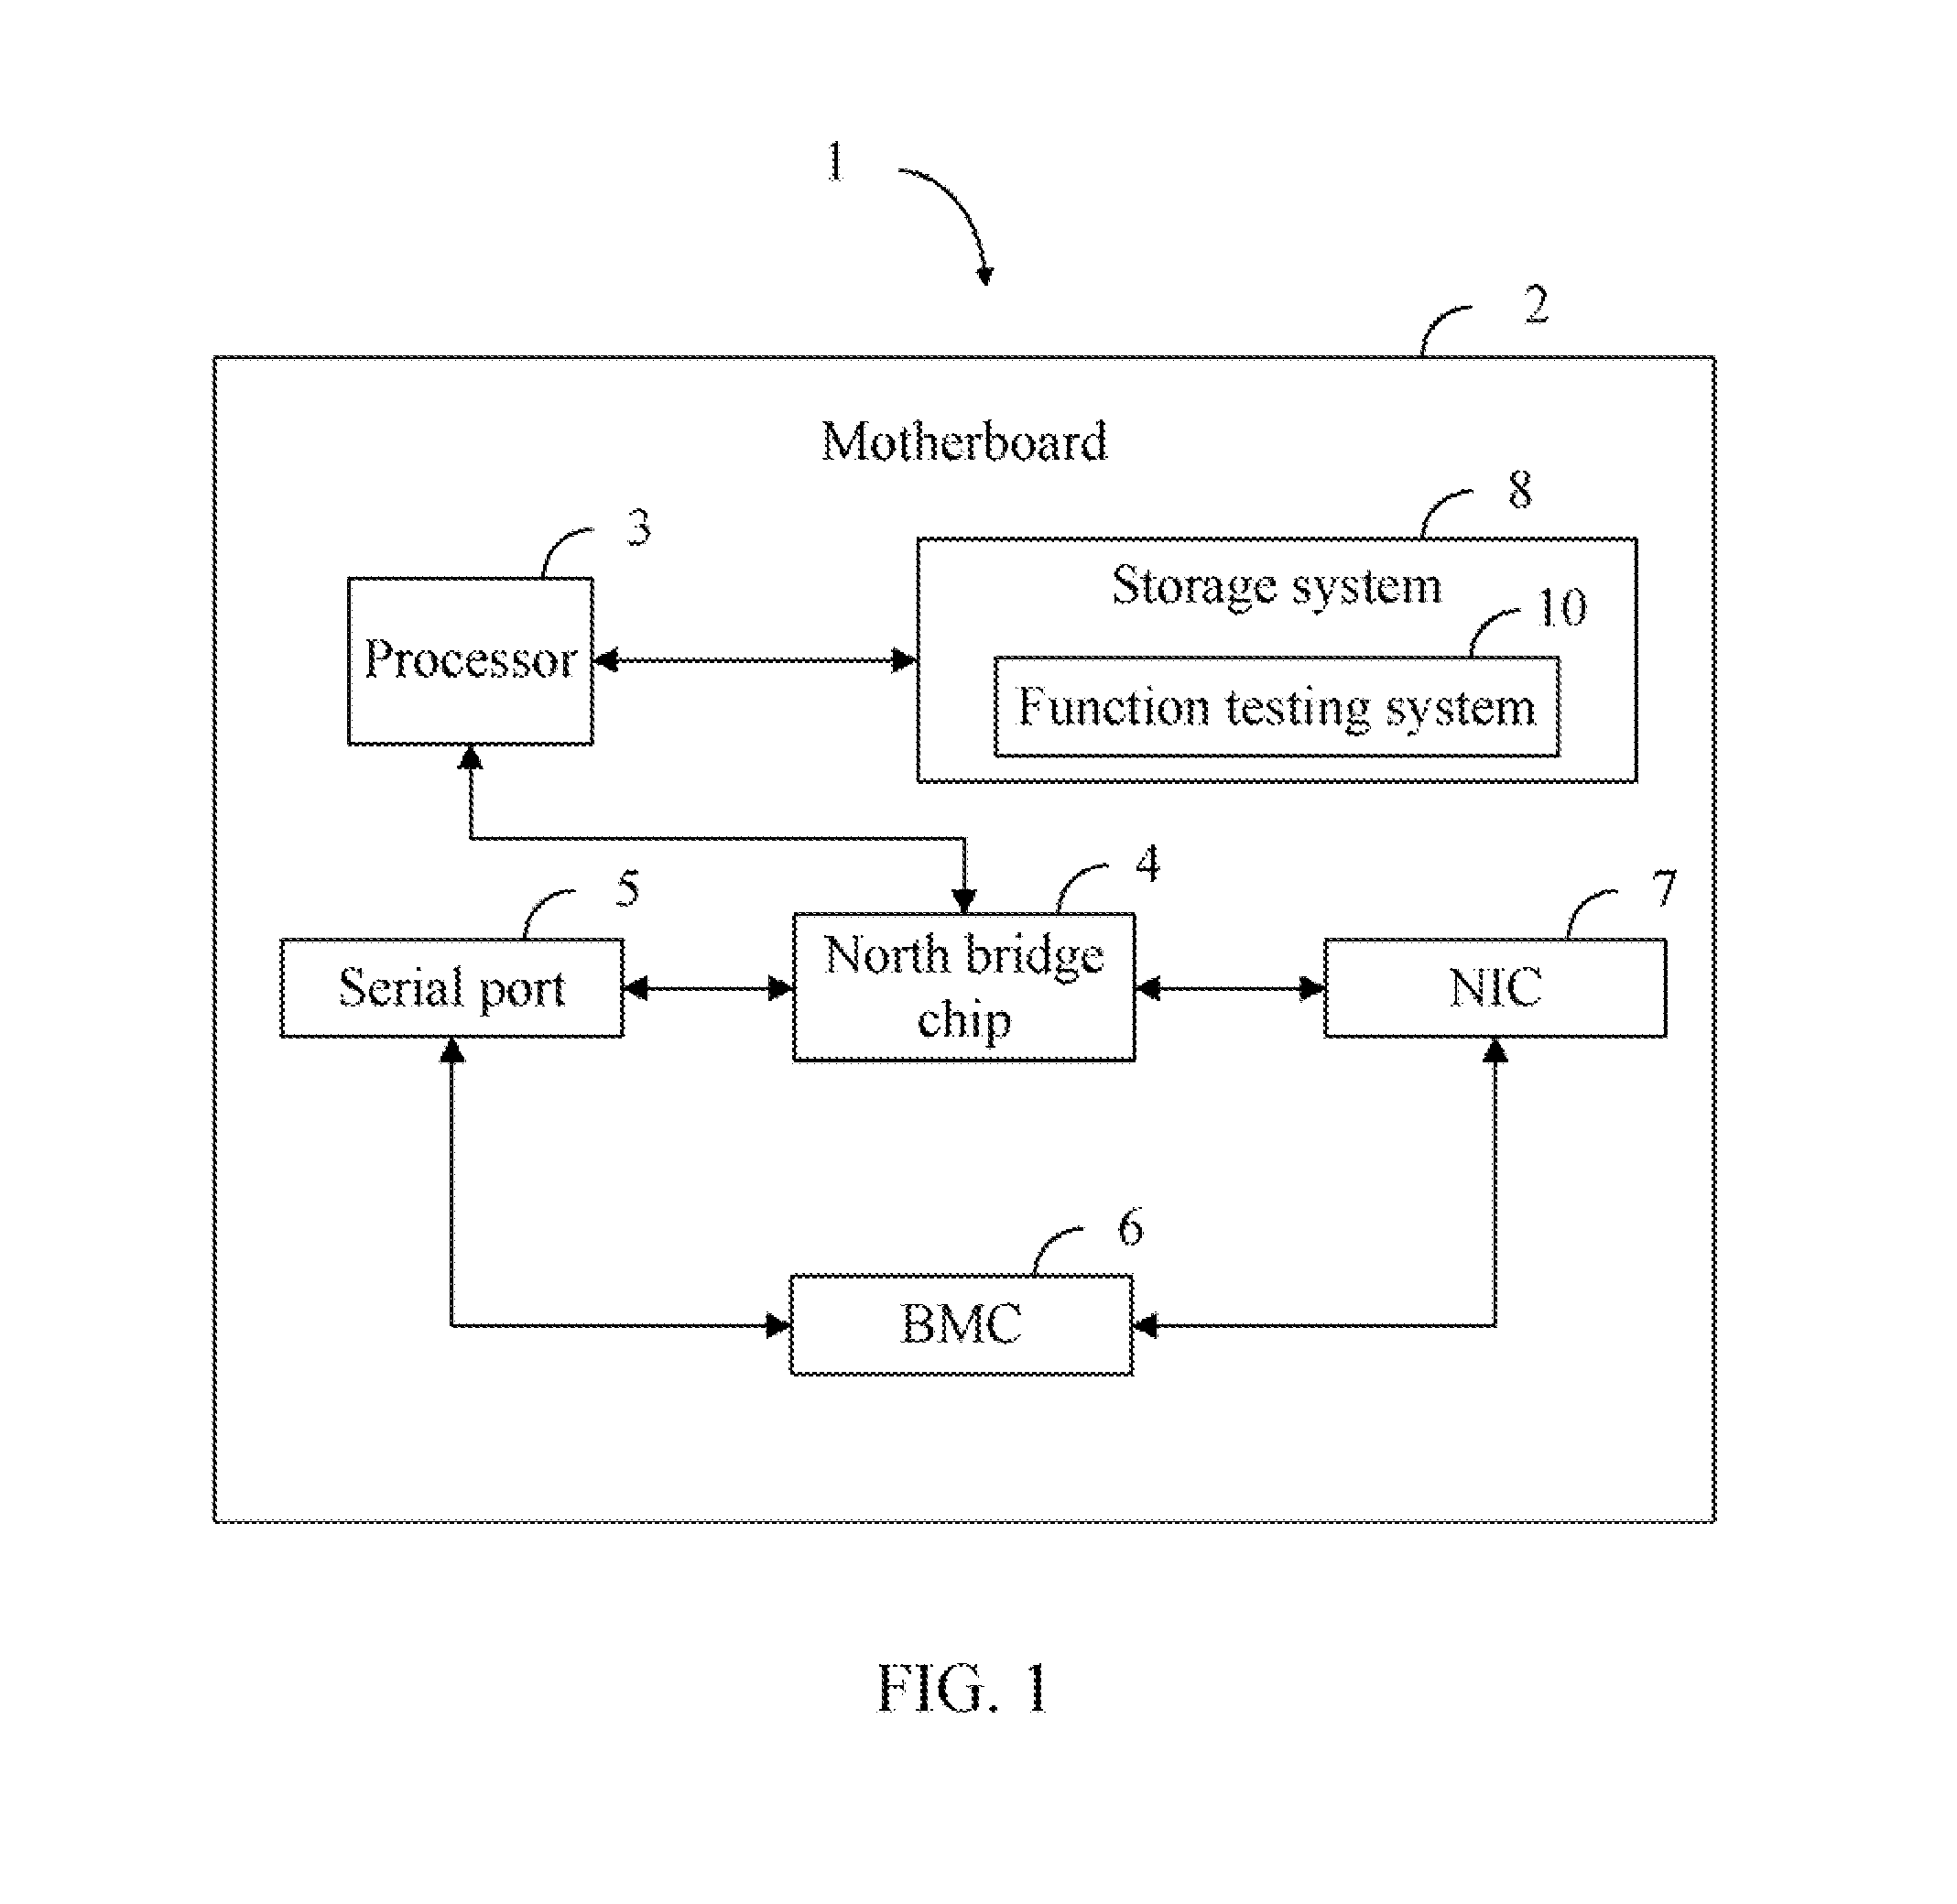 Computing device and method for testing SOL function of a motherboard of the computing device